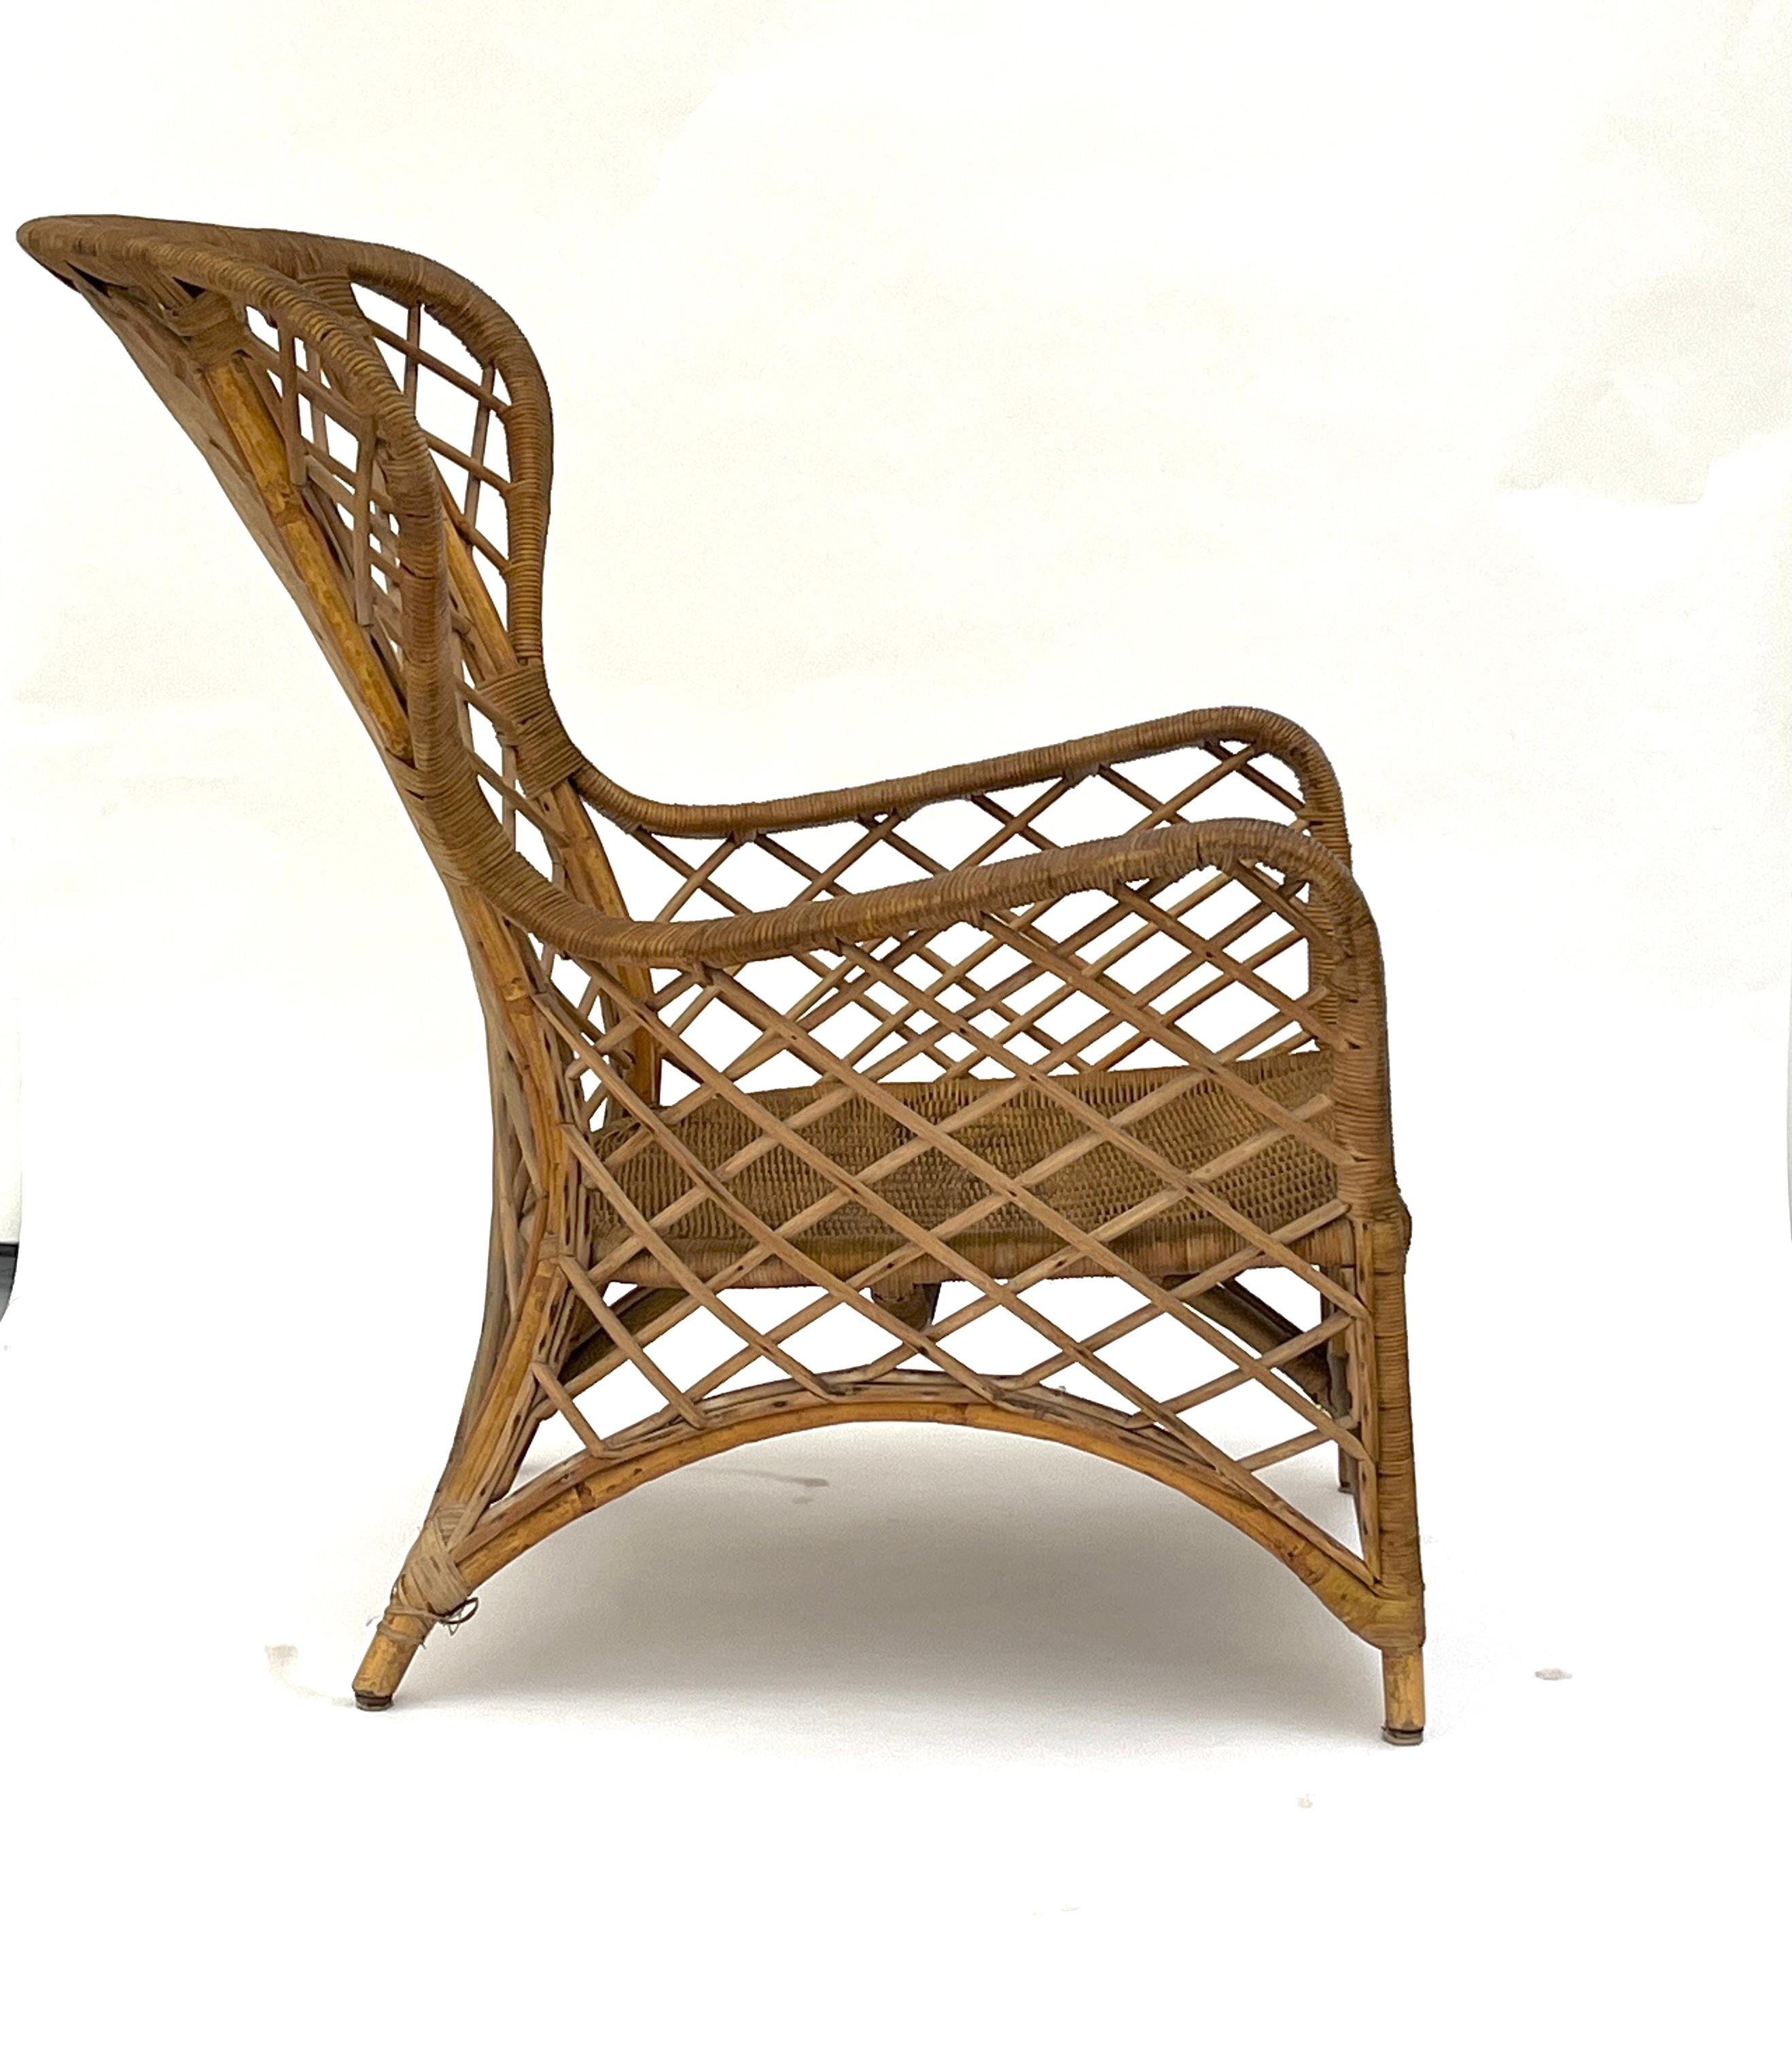 French Rattan Lounge Chair (Footrest) Attributed to Louis Sognot, Chevallier, 1952 For Sale